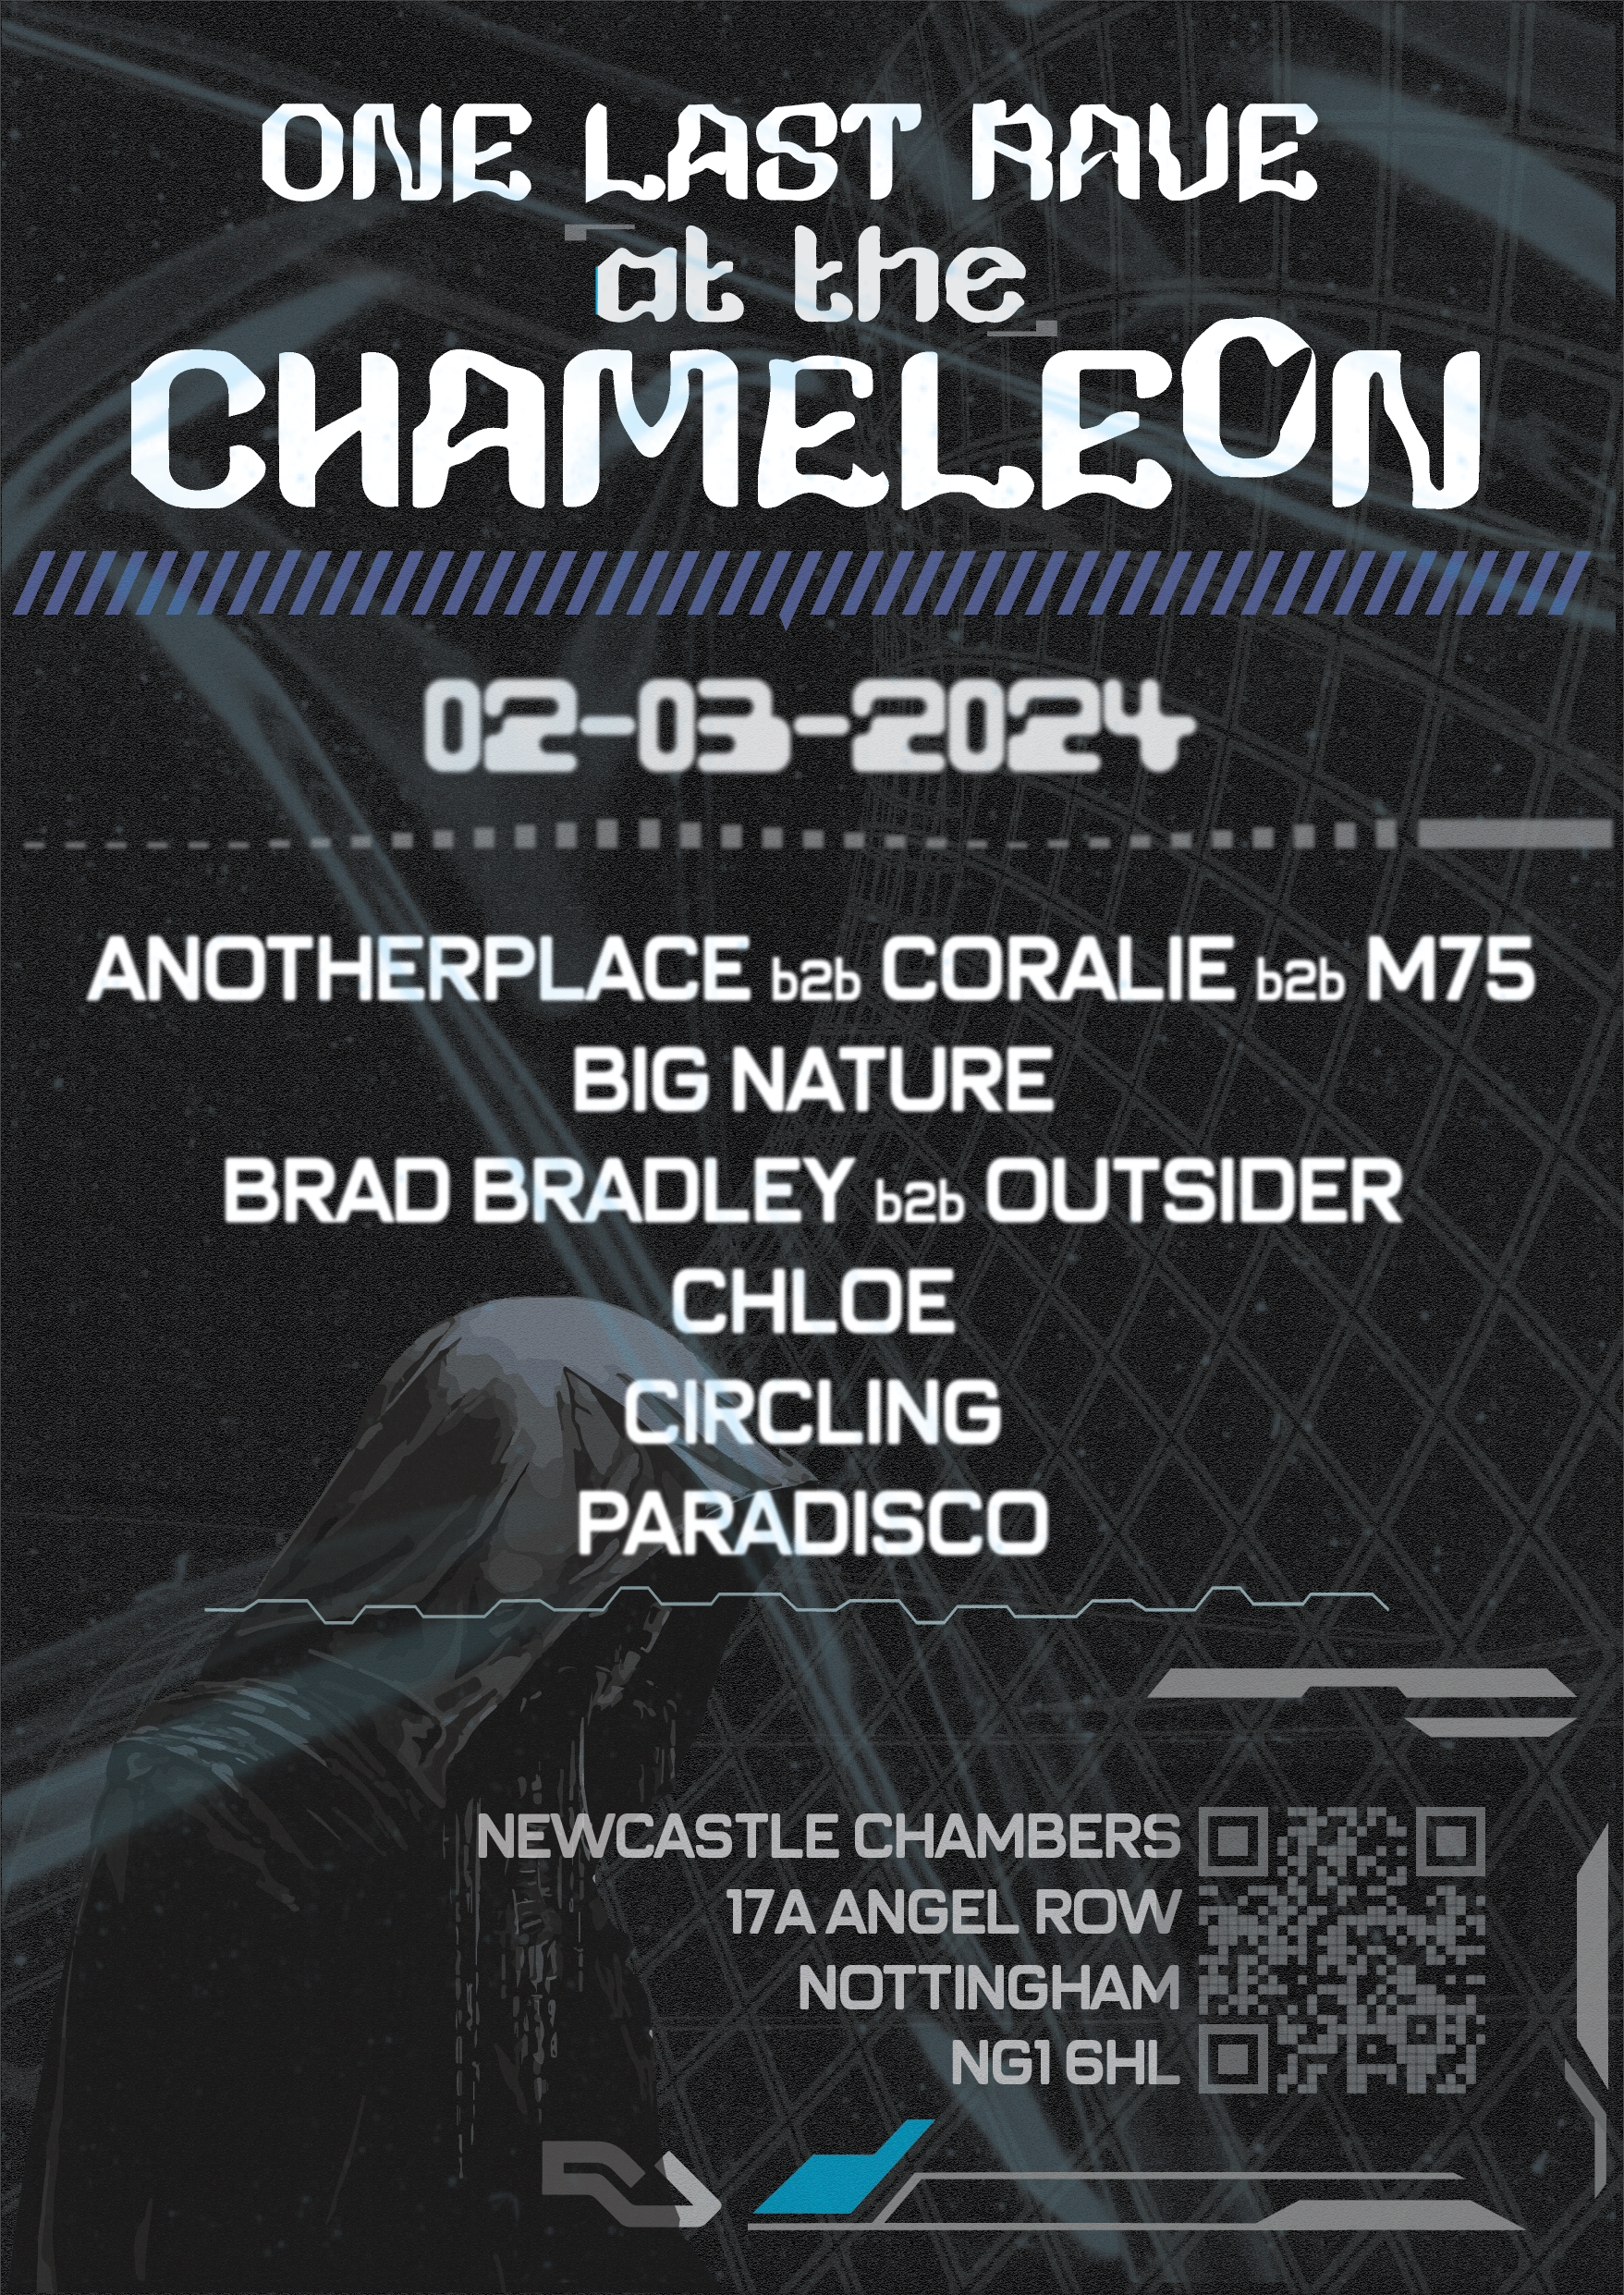 One Last Rave at The Chameleon - フライヤー表